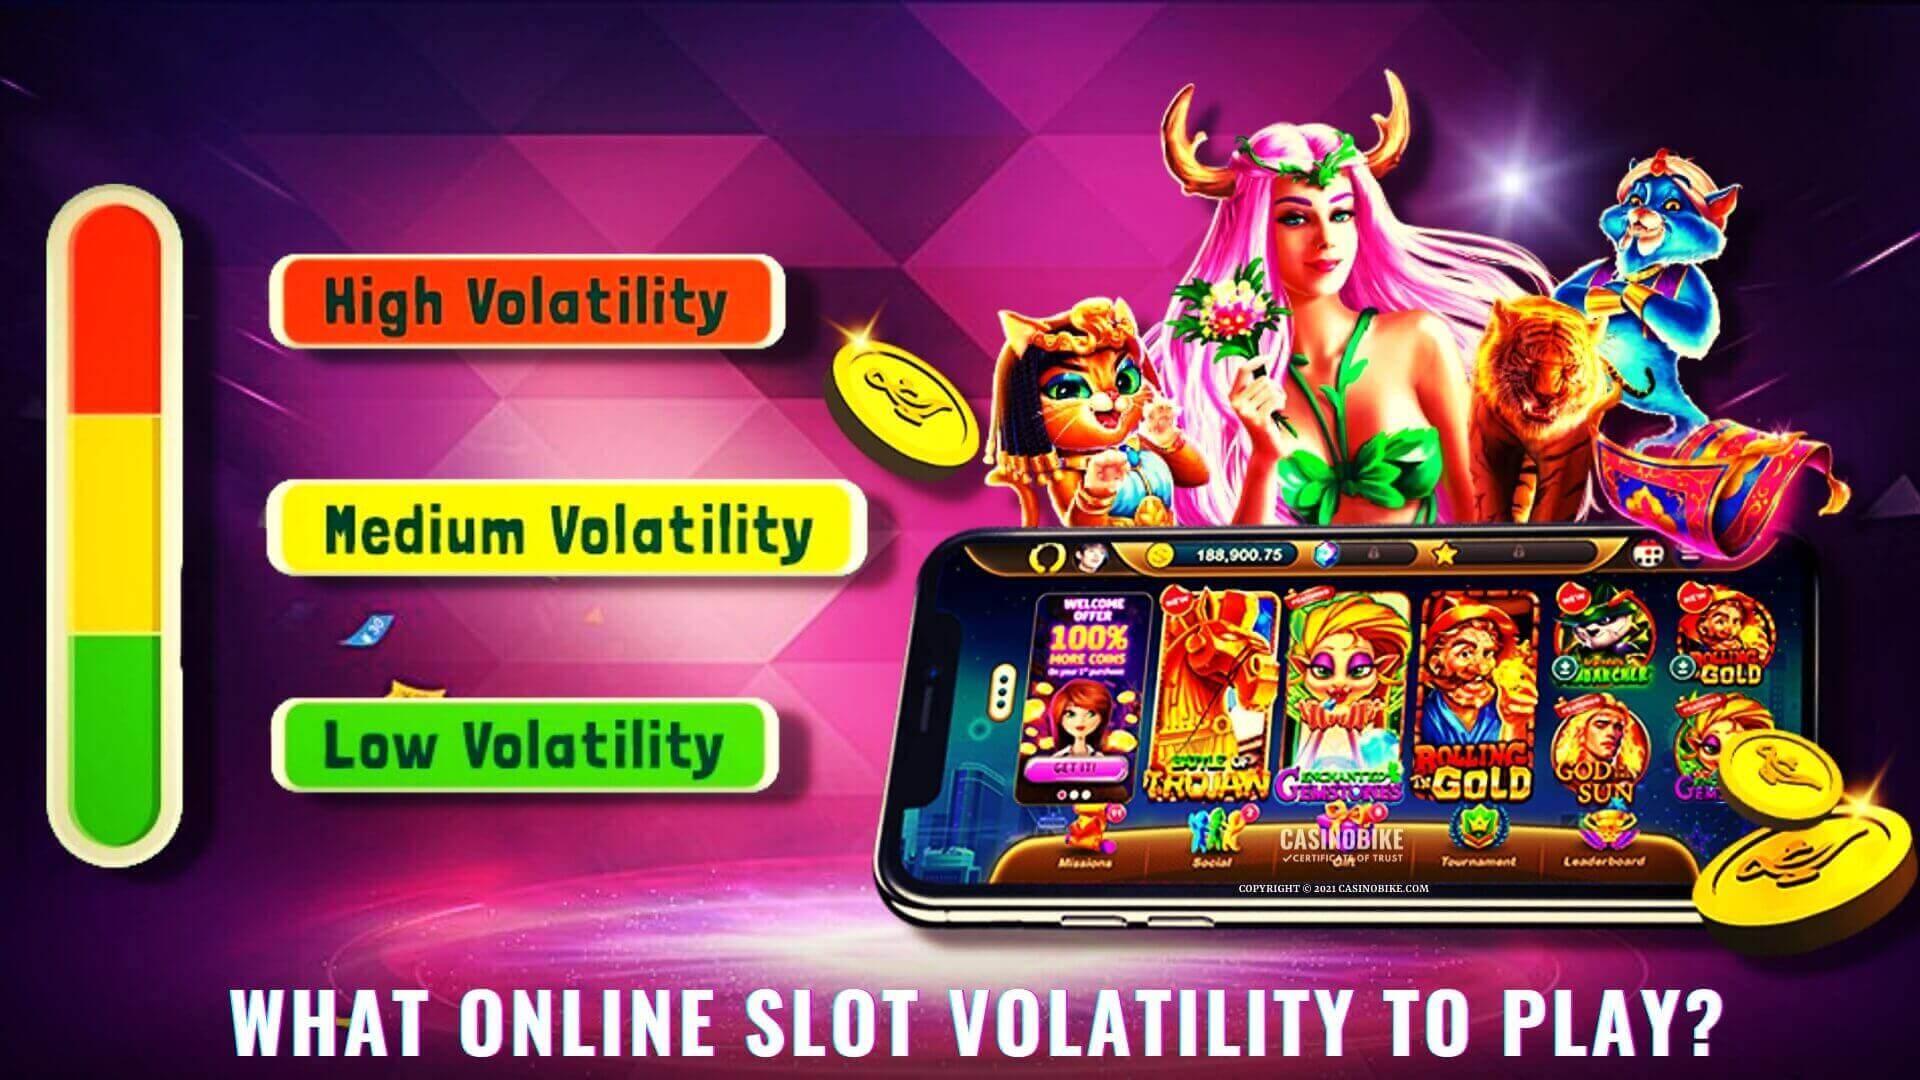 What slot volatility should I play?